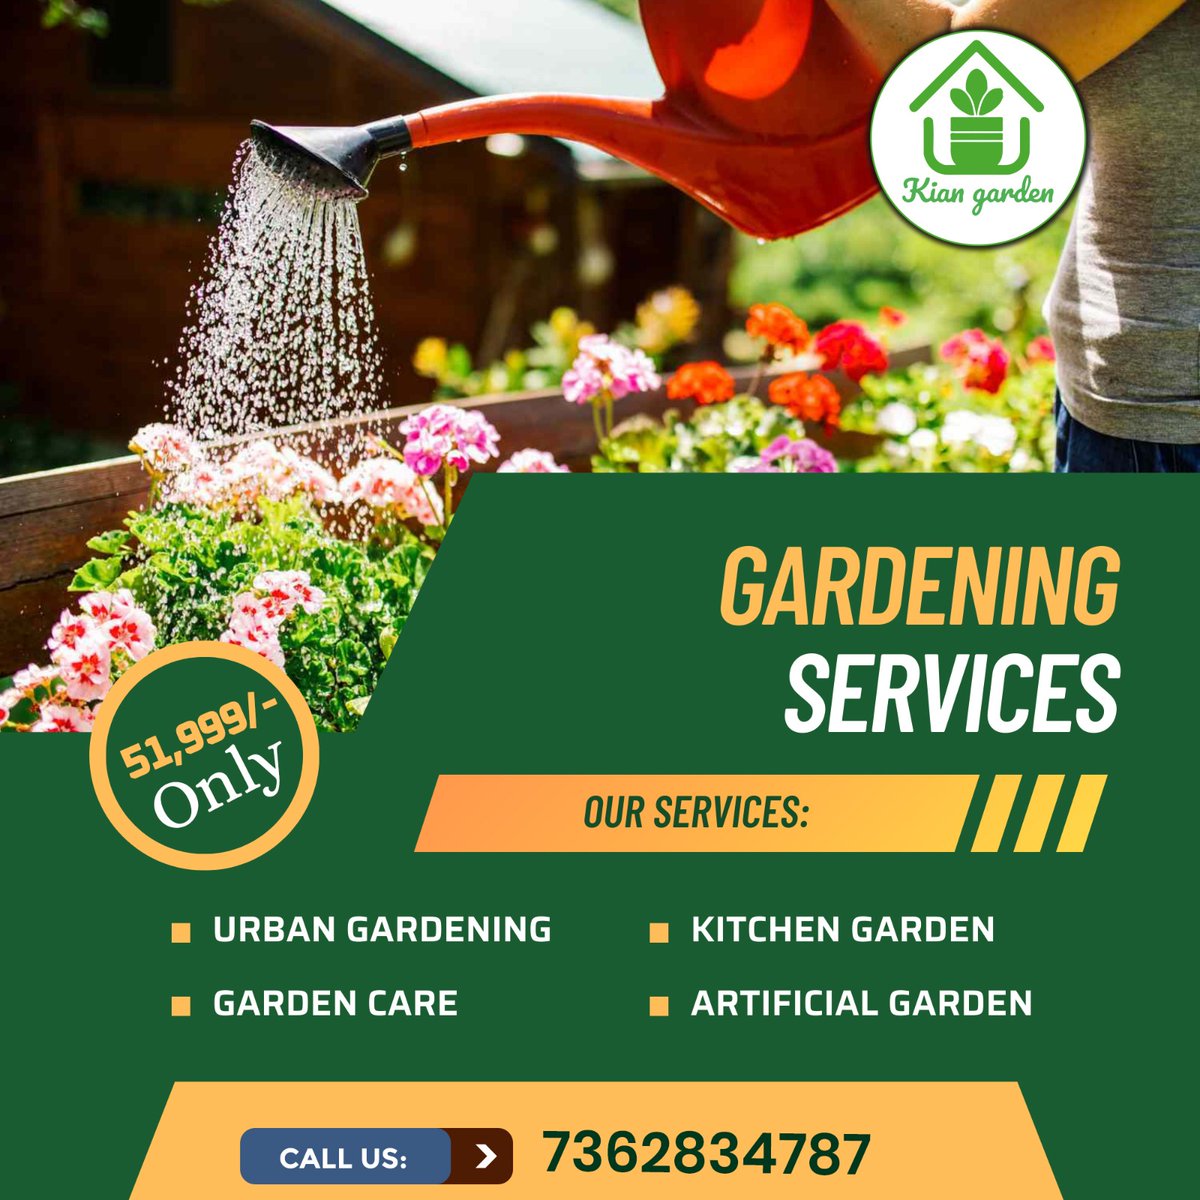 🌱 𝐖𝐞𝐥𝐜𝐨𝐦𝐞 𝐭𝐨 𝐊𝐢𝐚𝐧 𝐆𝐚𝐫𝐝𝐞𝐧! 🌿
Our passion for gardening and landscaping is reflected in the meticulous care and creativity we bring to every project. 

#gardendecor #gardeningtipsforbeginners #gardendesignideas #gardeninglove #gardenarea #balconygarden